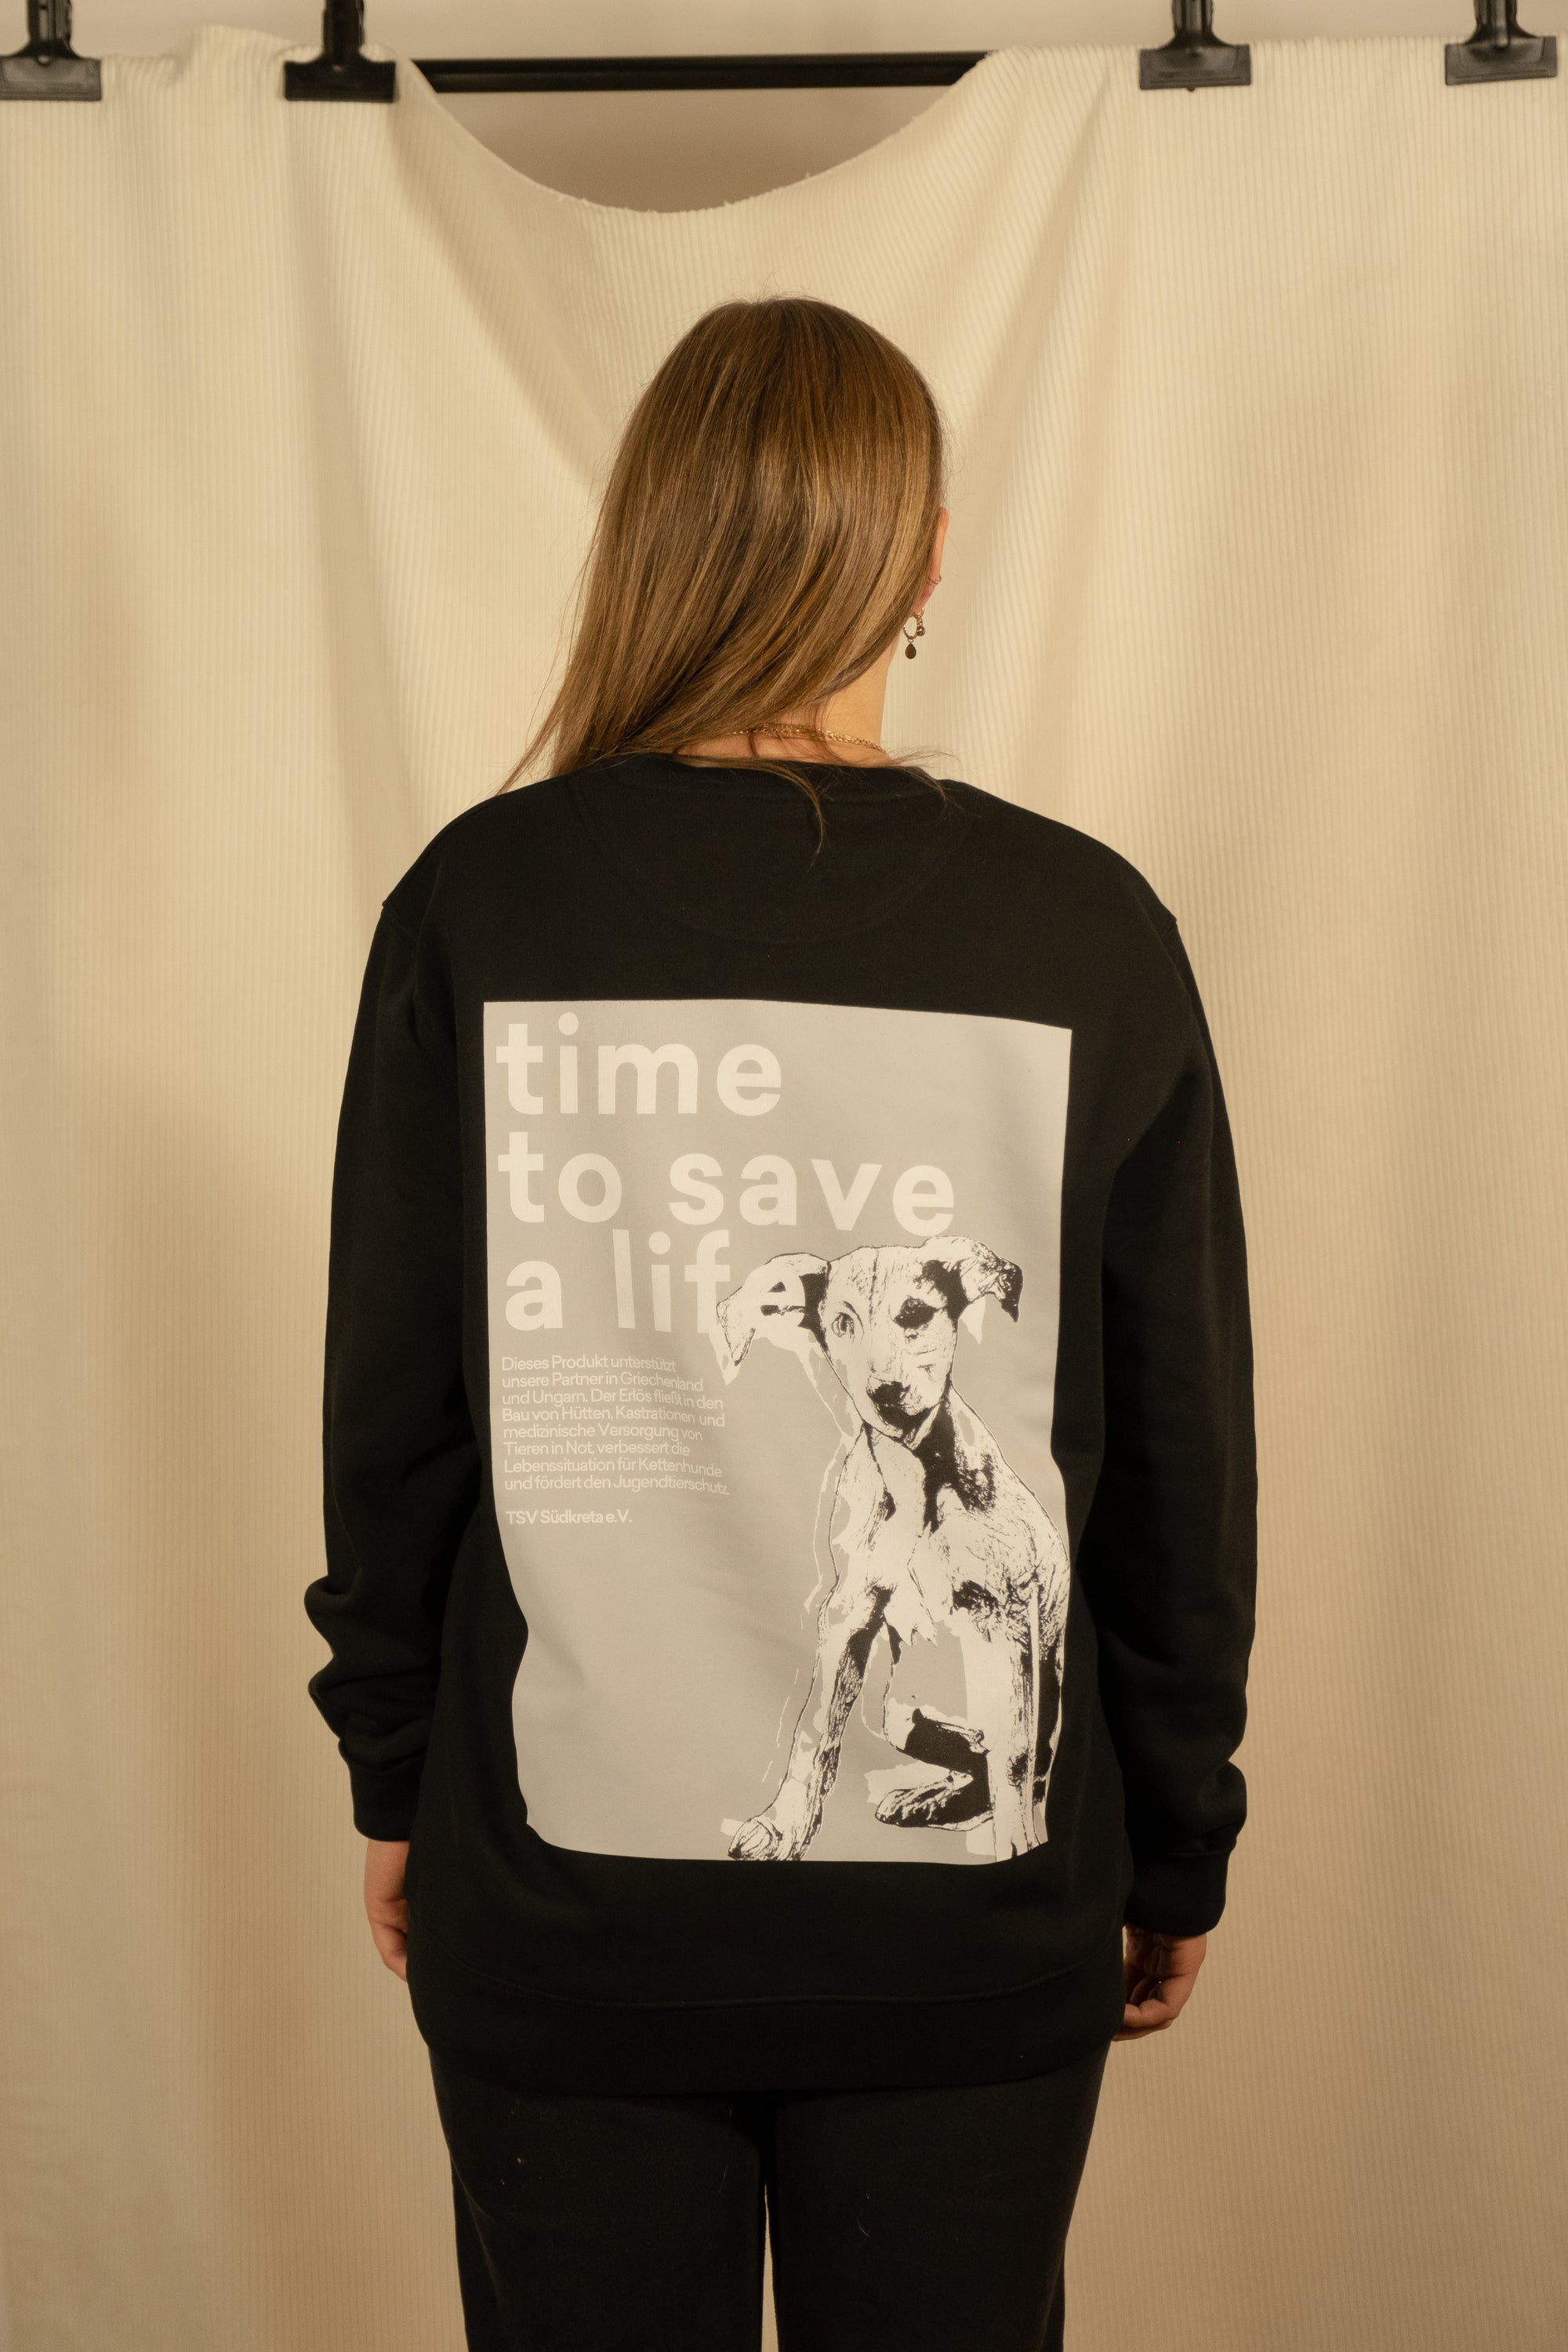 Crewneck "Time to save a life" in schwarz